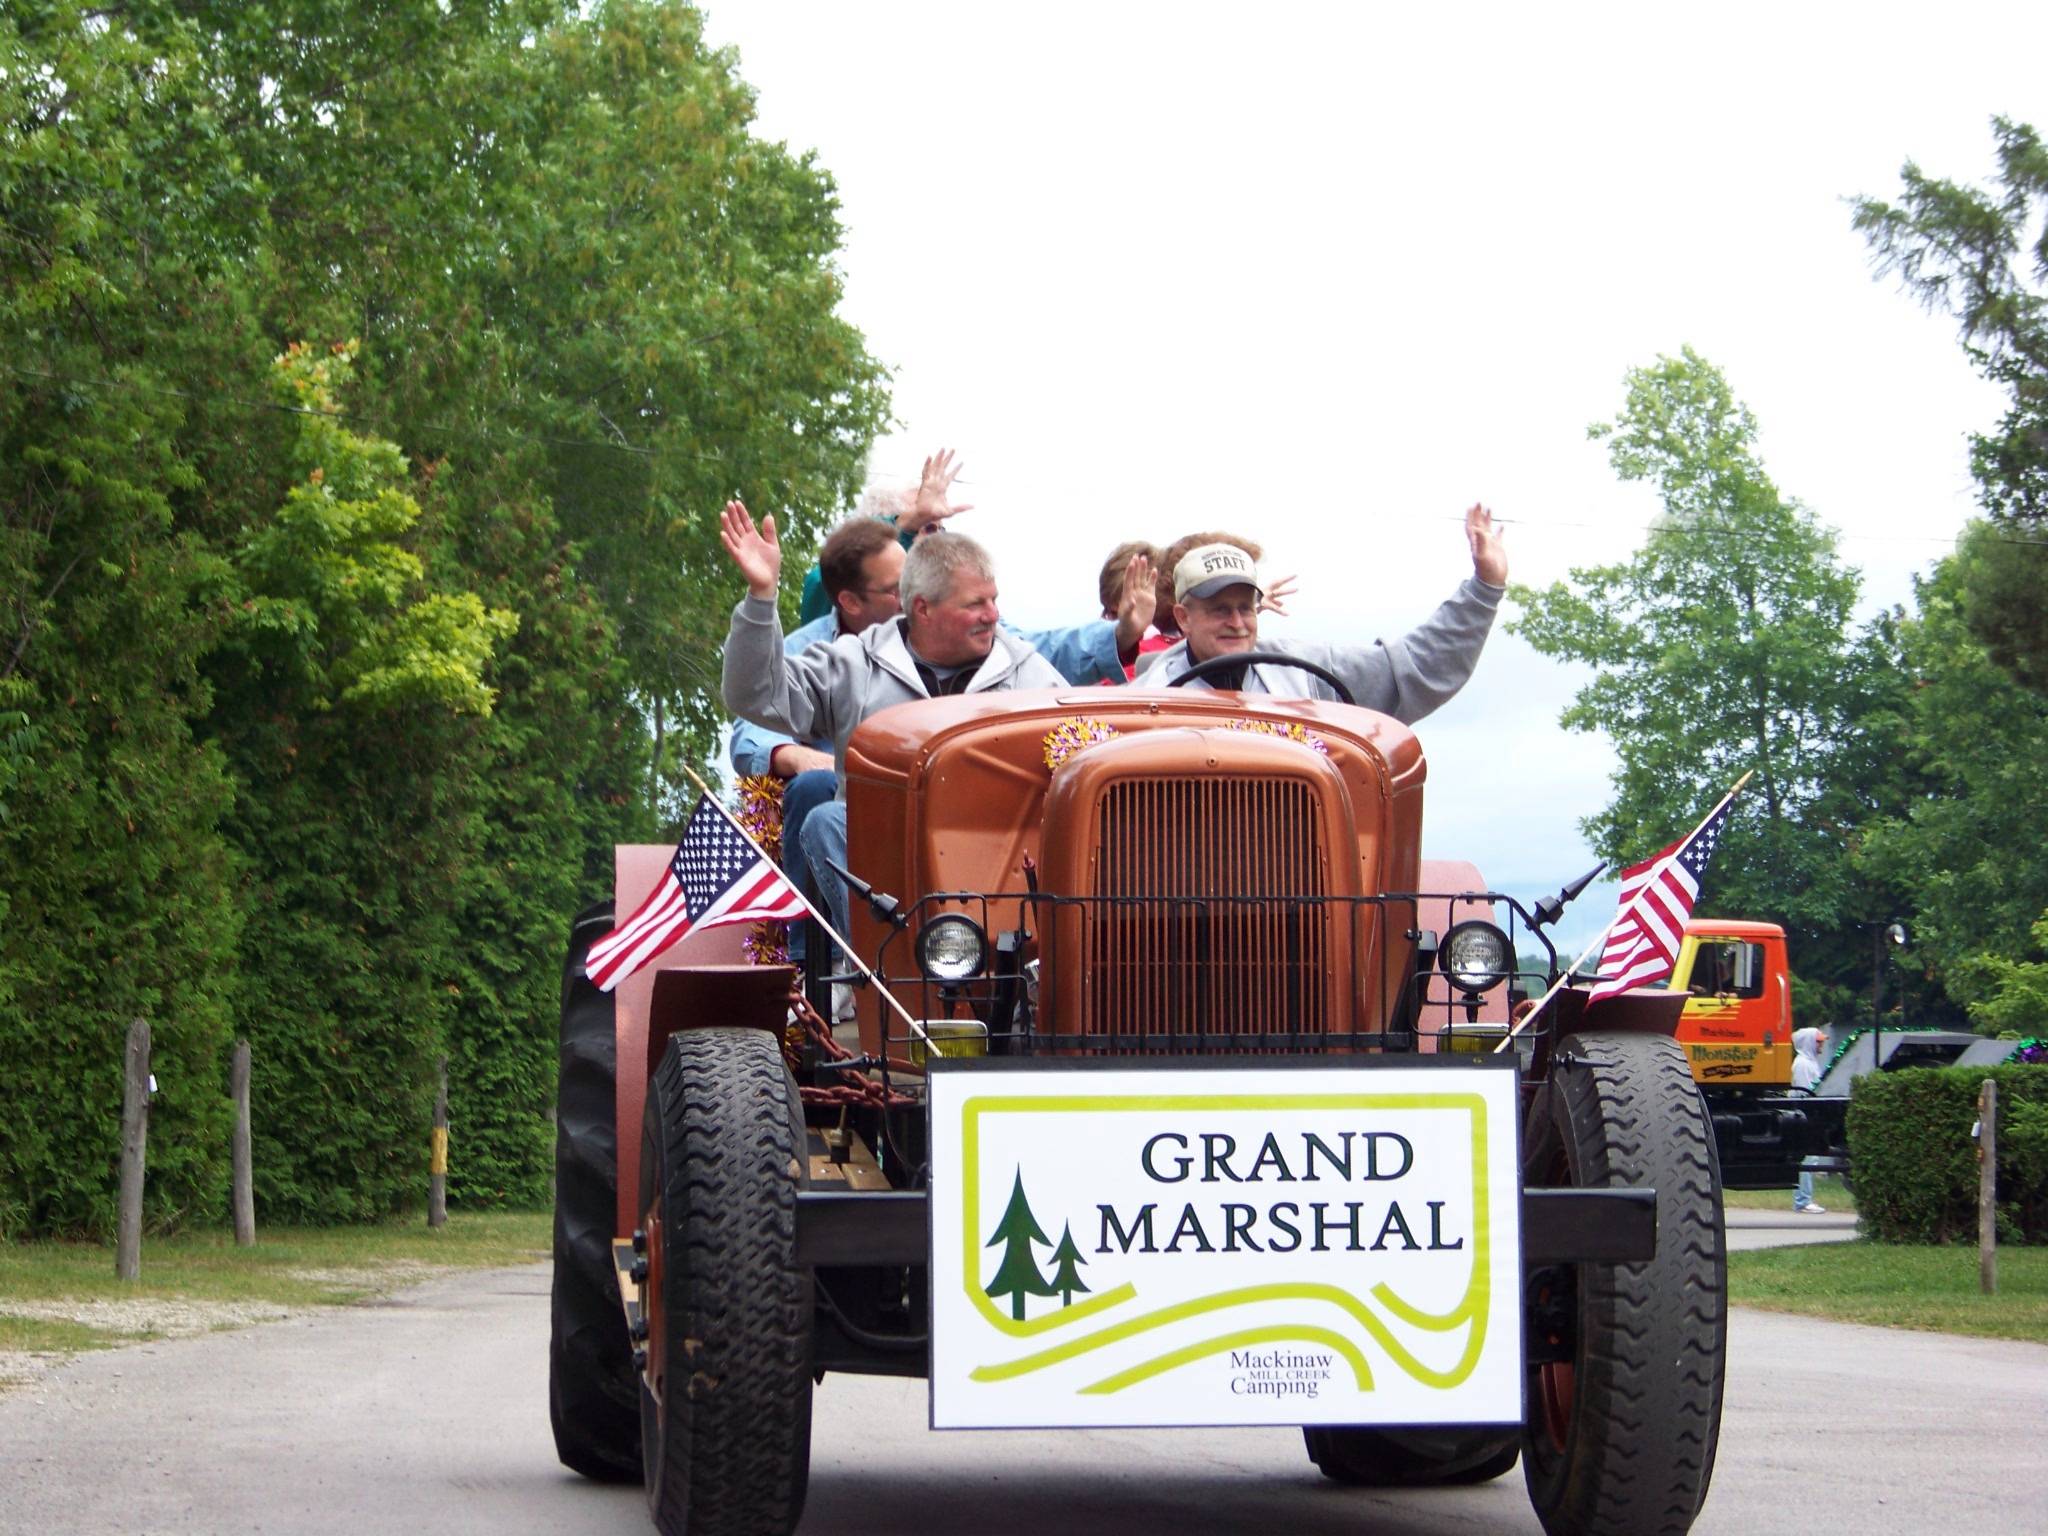 Grand Marshal on a Ford tractor at Mackinaw Mill Creek Camping's 50th Anniversary celebration parade. Copyright (©) 2014 Mackinaw Mill Creek Camping and Frank Rogala. All rights reserved.